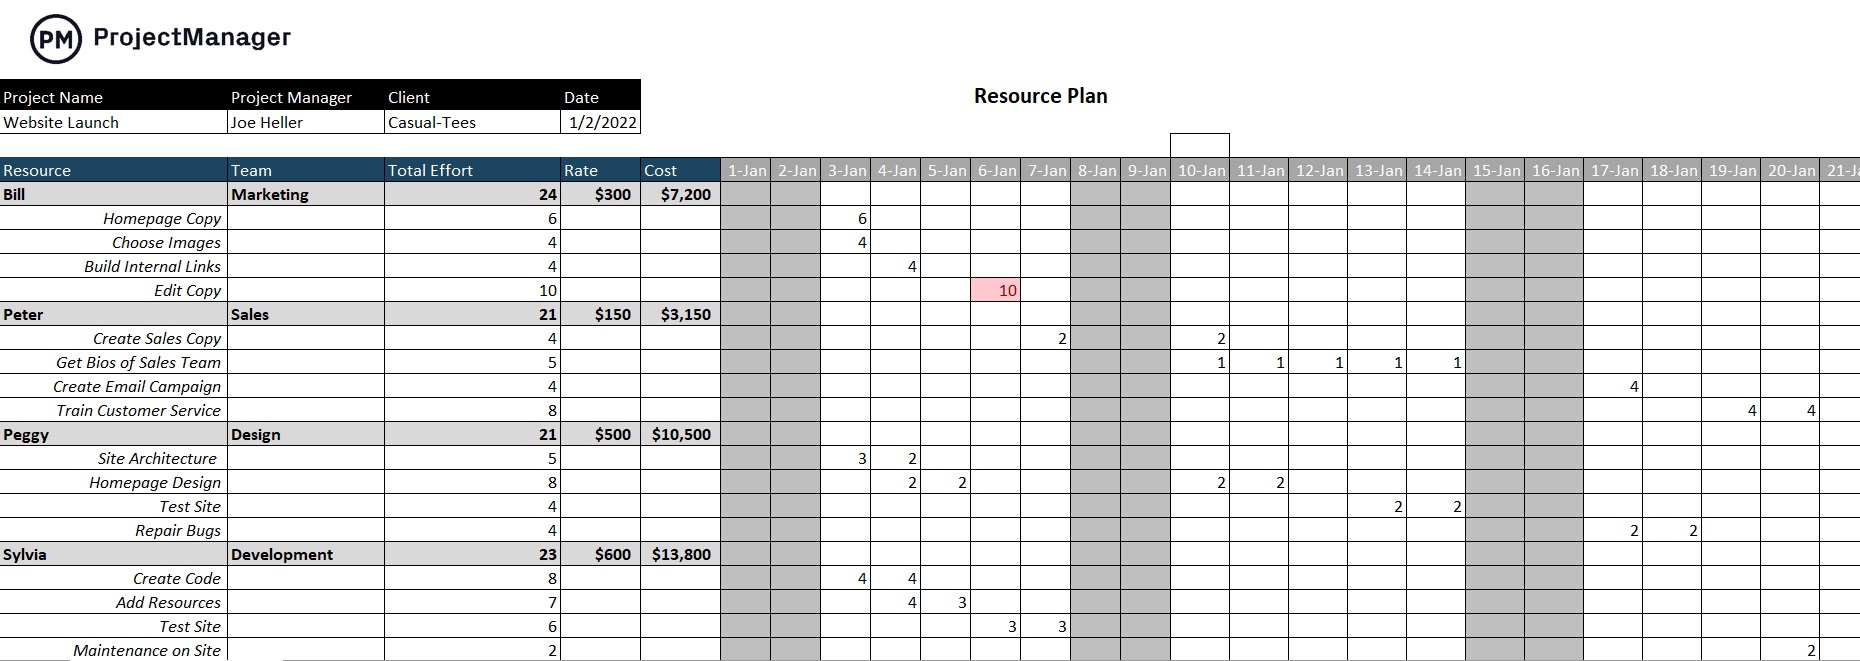 project resource plan template for Excel - free download